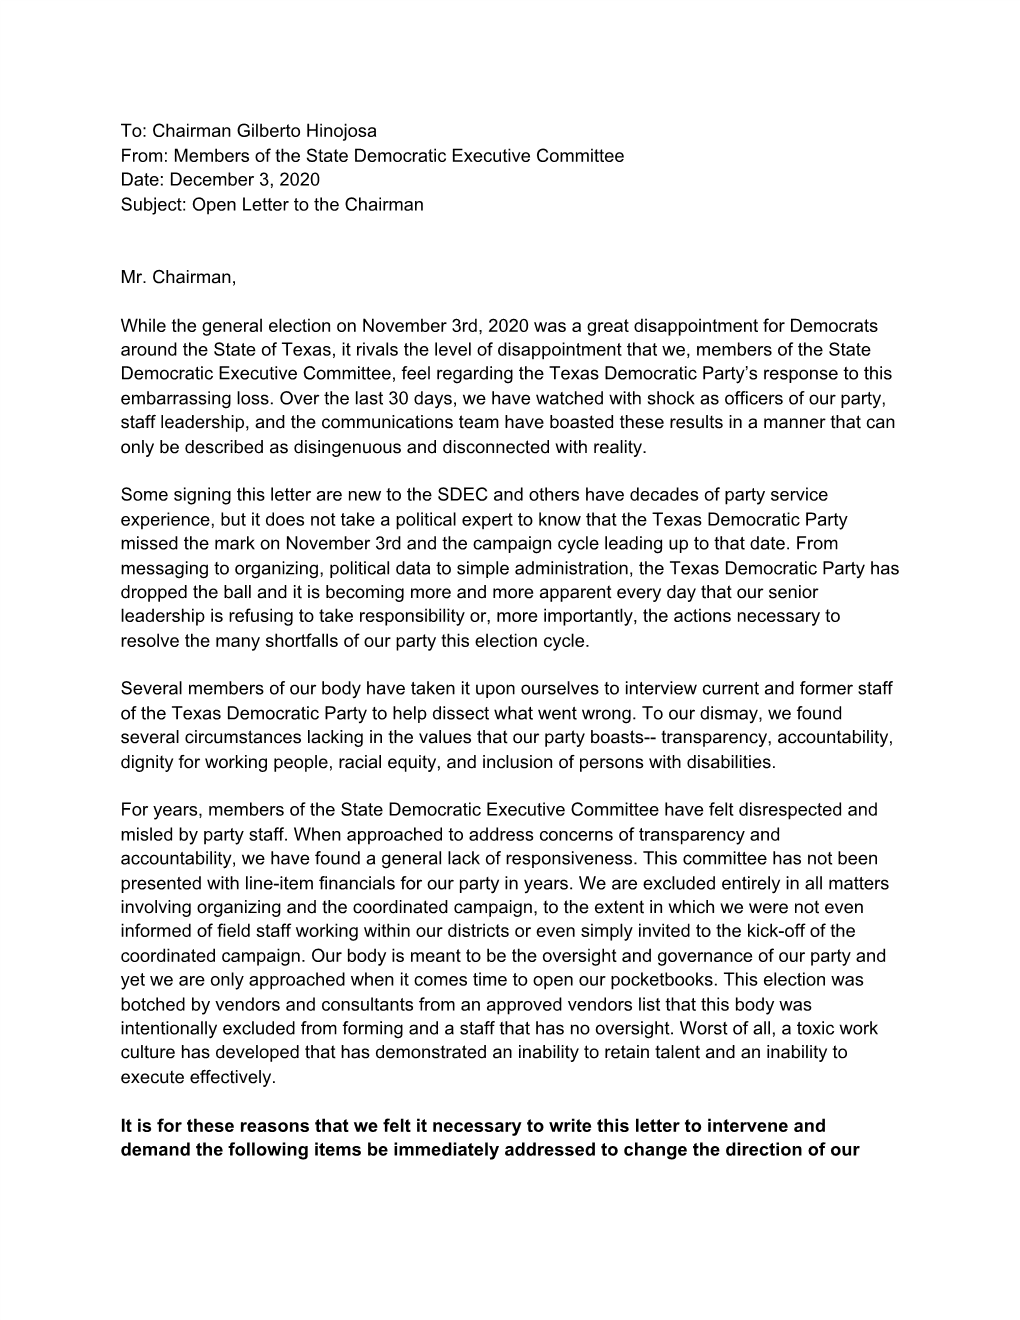 Chairman Gilberto Hinojosa From: Members of the State Democratic Executive Committee Date: December 3, 2020 Subject: Open Letter to the Chairman